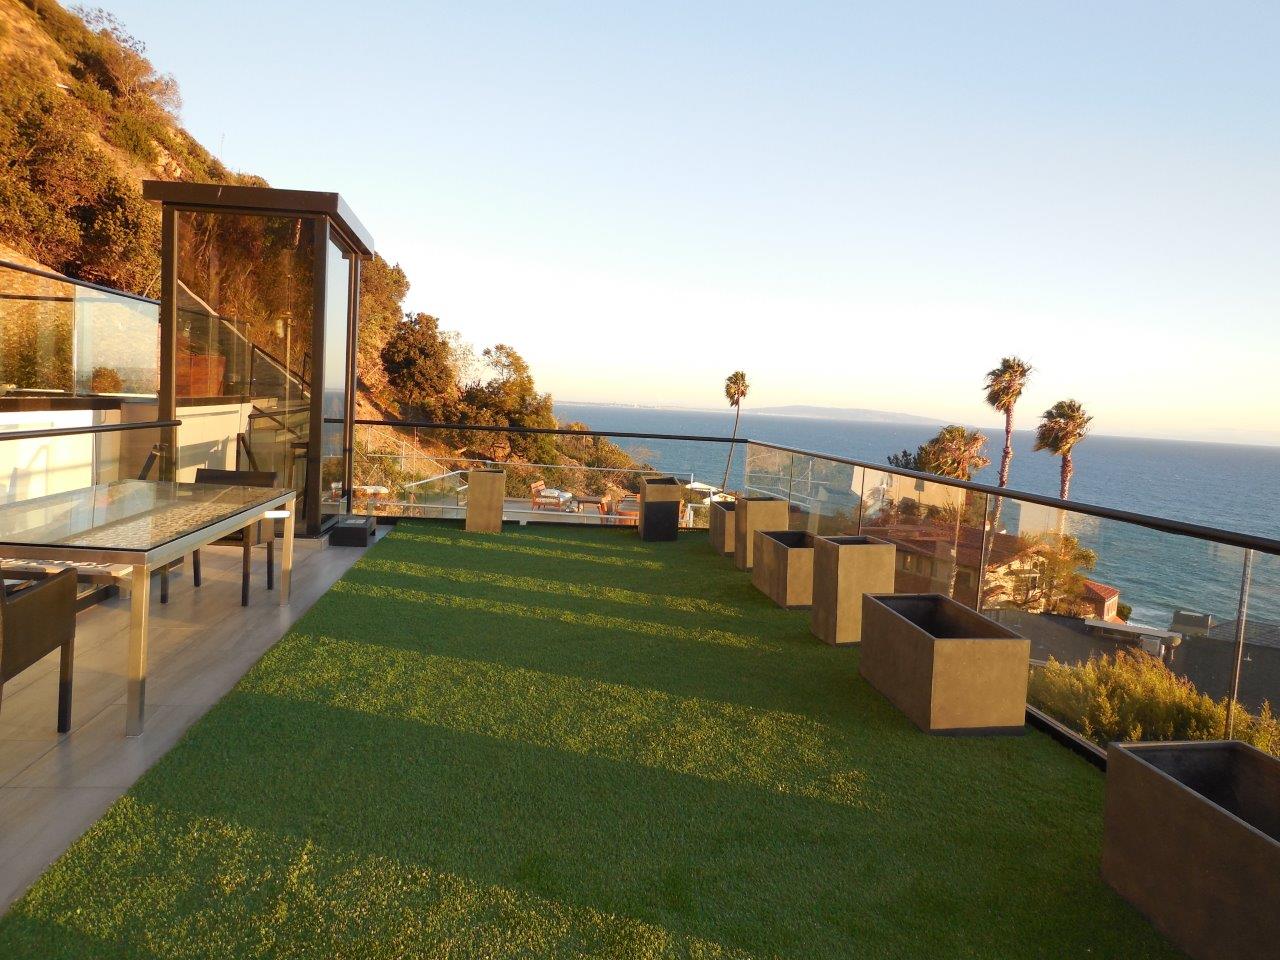 Terrace with beach views in Southern California. The terrace features a table, planters, and a lovely area with artificial turf.